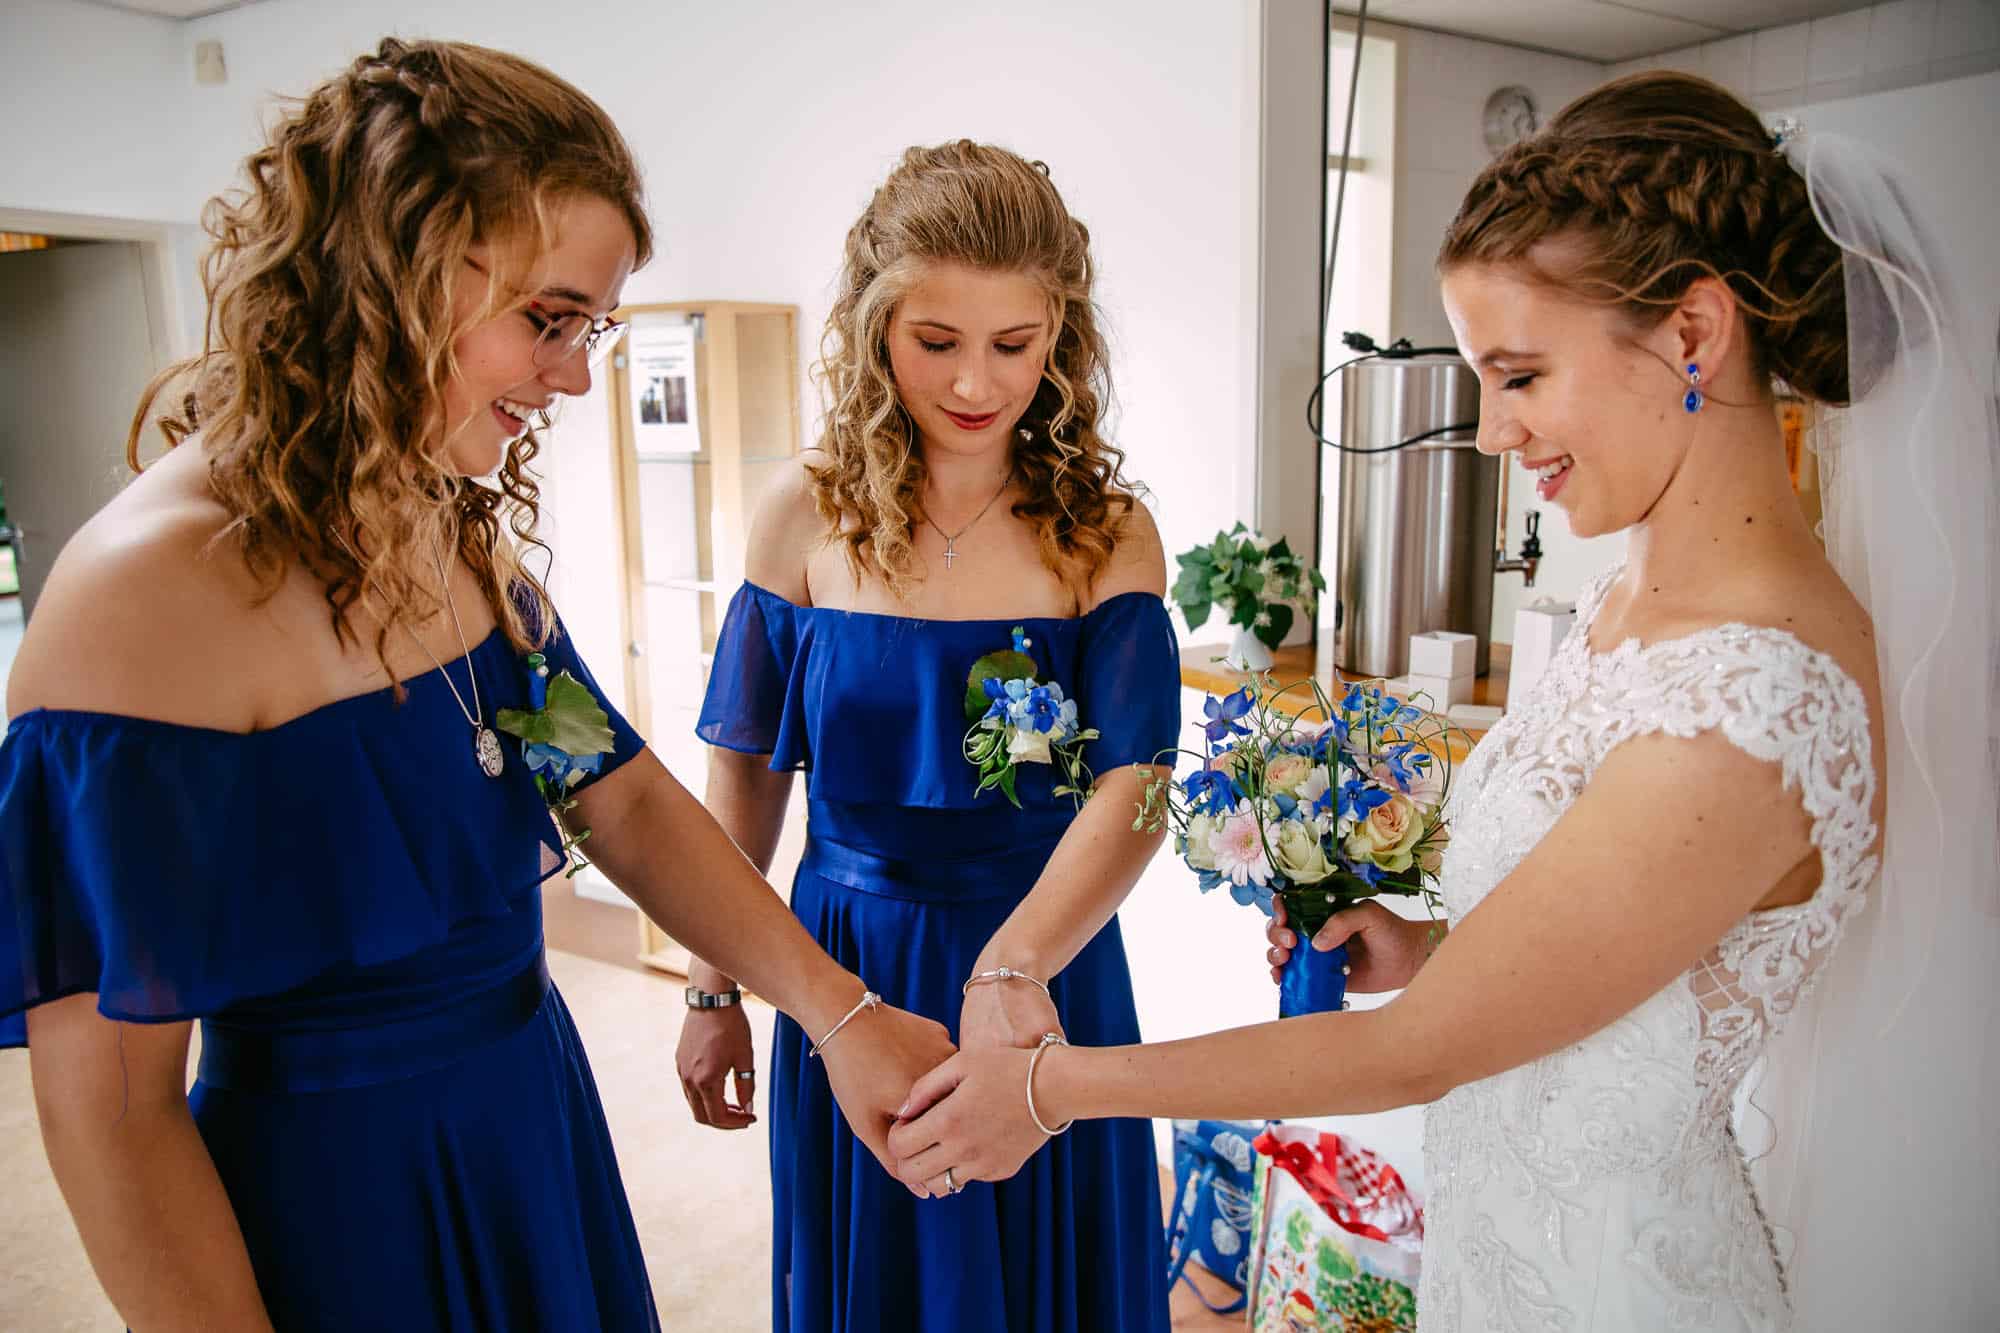 Three bridesmaids in blue dresses, with one master of ceremonies holding hands.